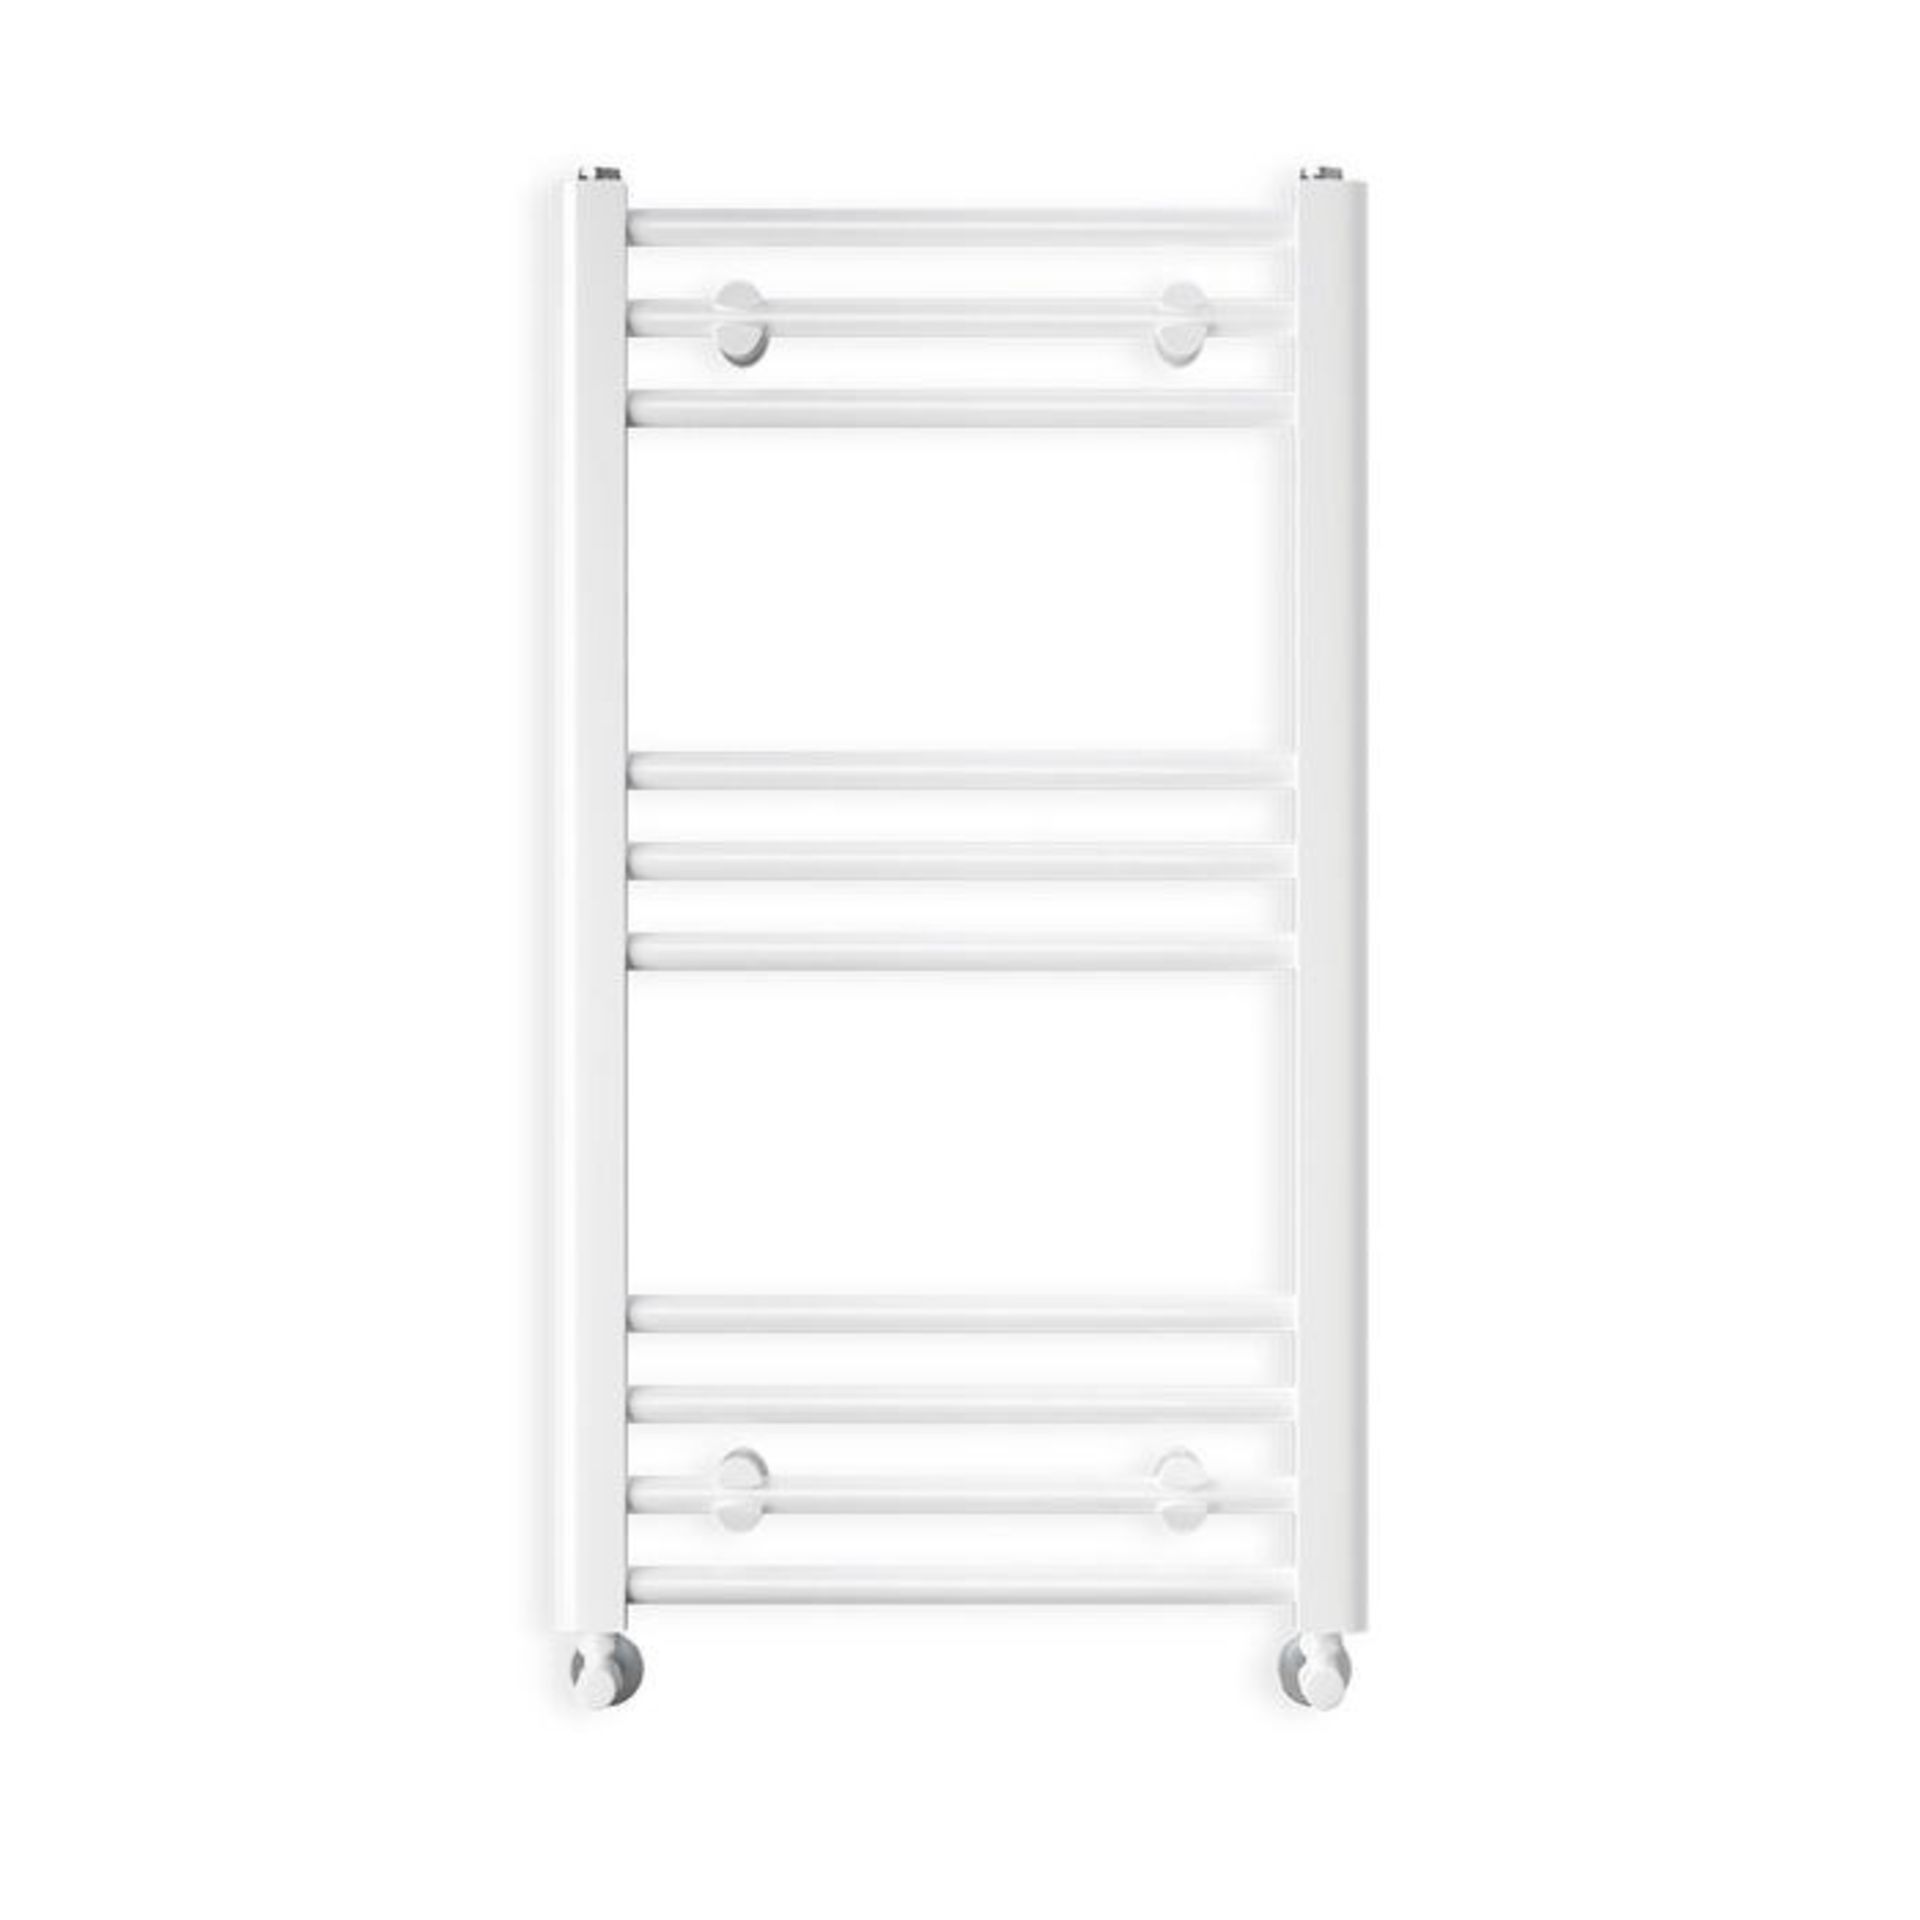 (HM132) 600x500mm White Matt Heated Towel Radiator..Made from low carbon steel Finished with a ... - Image 2 of 2